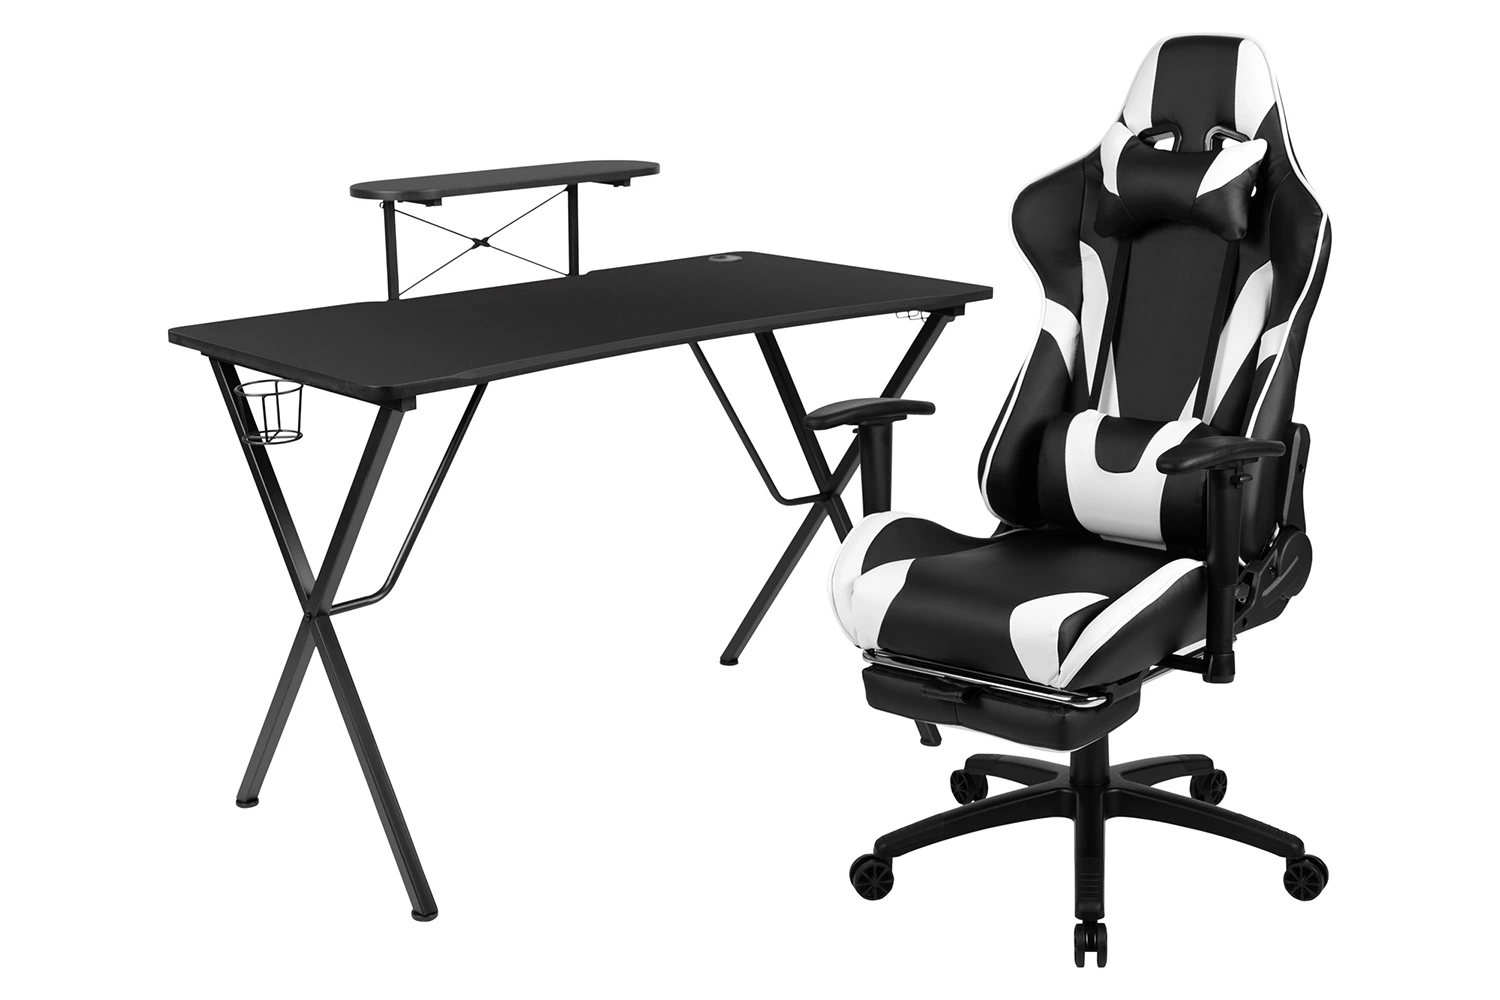 BLNK® Optis Black Gaming Desk and Footrest Reclining Gaming Chair Set with Cup Holder, Headphone Hook and Monitor/Smartphone Stand. Product Type: Desk and Chair Set, Room Type: Home Office, Collection: Optis, Color: Black, Material: Laminate, Faux Leather